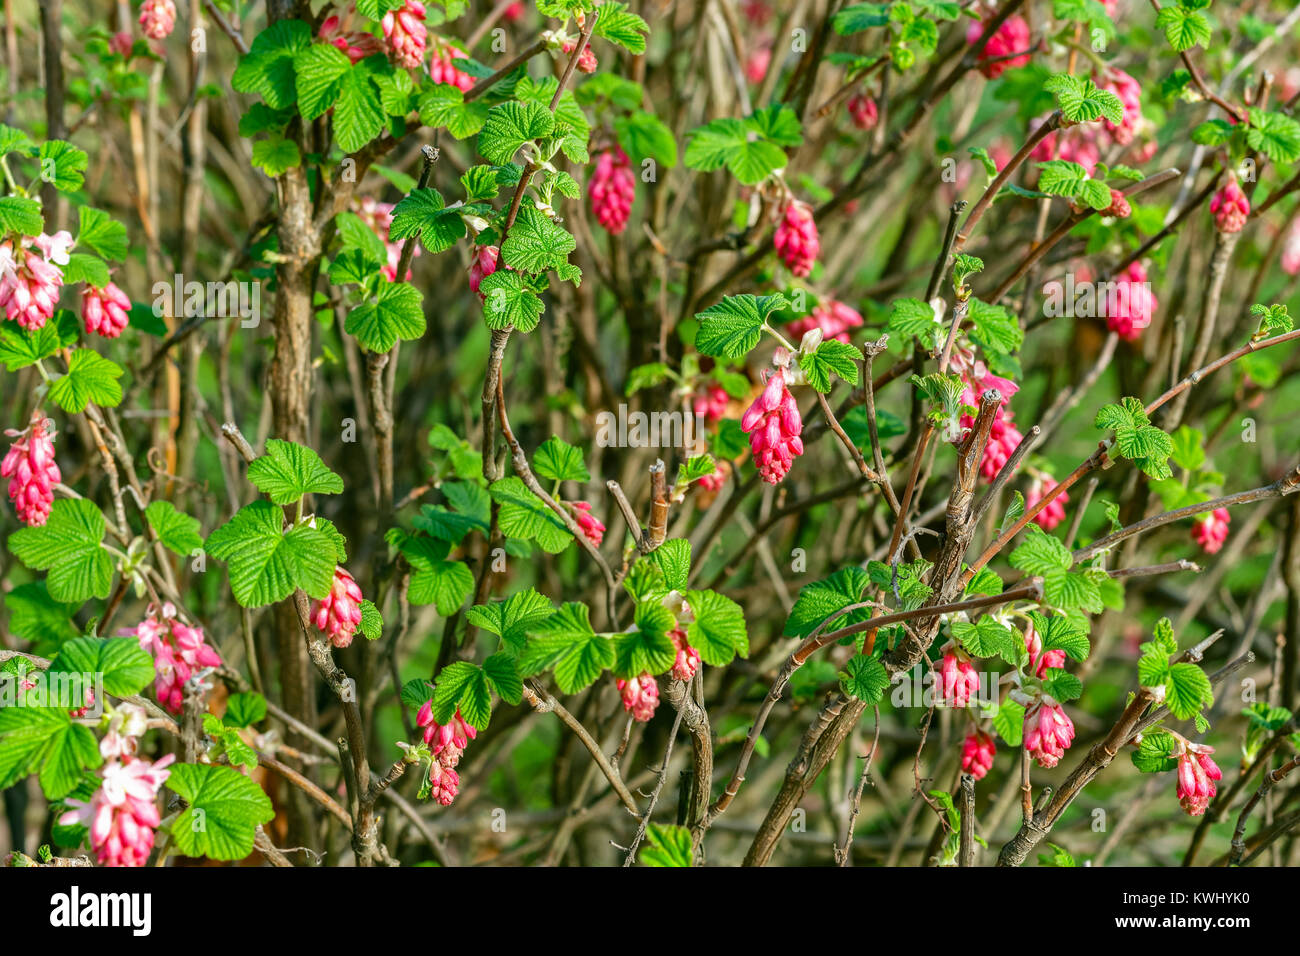 Ribes flowering currant in a Thames Barrier park in London Stock Photo